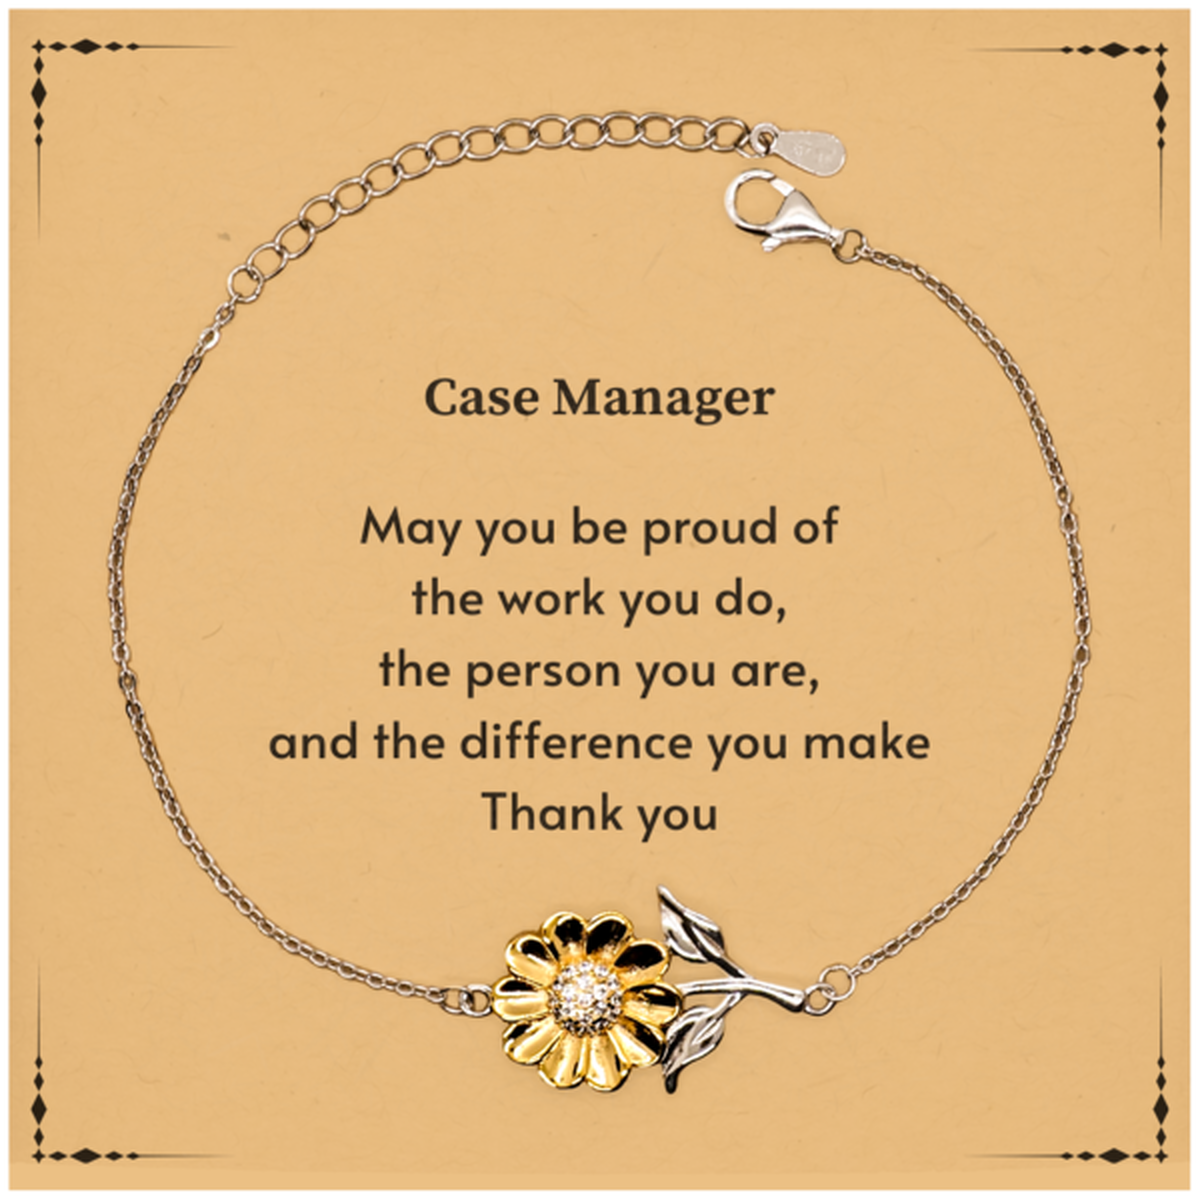 Heartwarming Sunflower Bracelet Retirement Coworkers Gifts for Case Manager, Case Manager May You be proud of the work you do, the person you are Gifts for Boss Men Women Friends